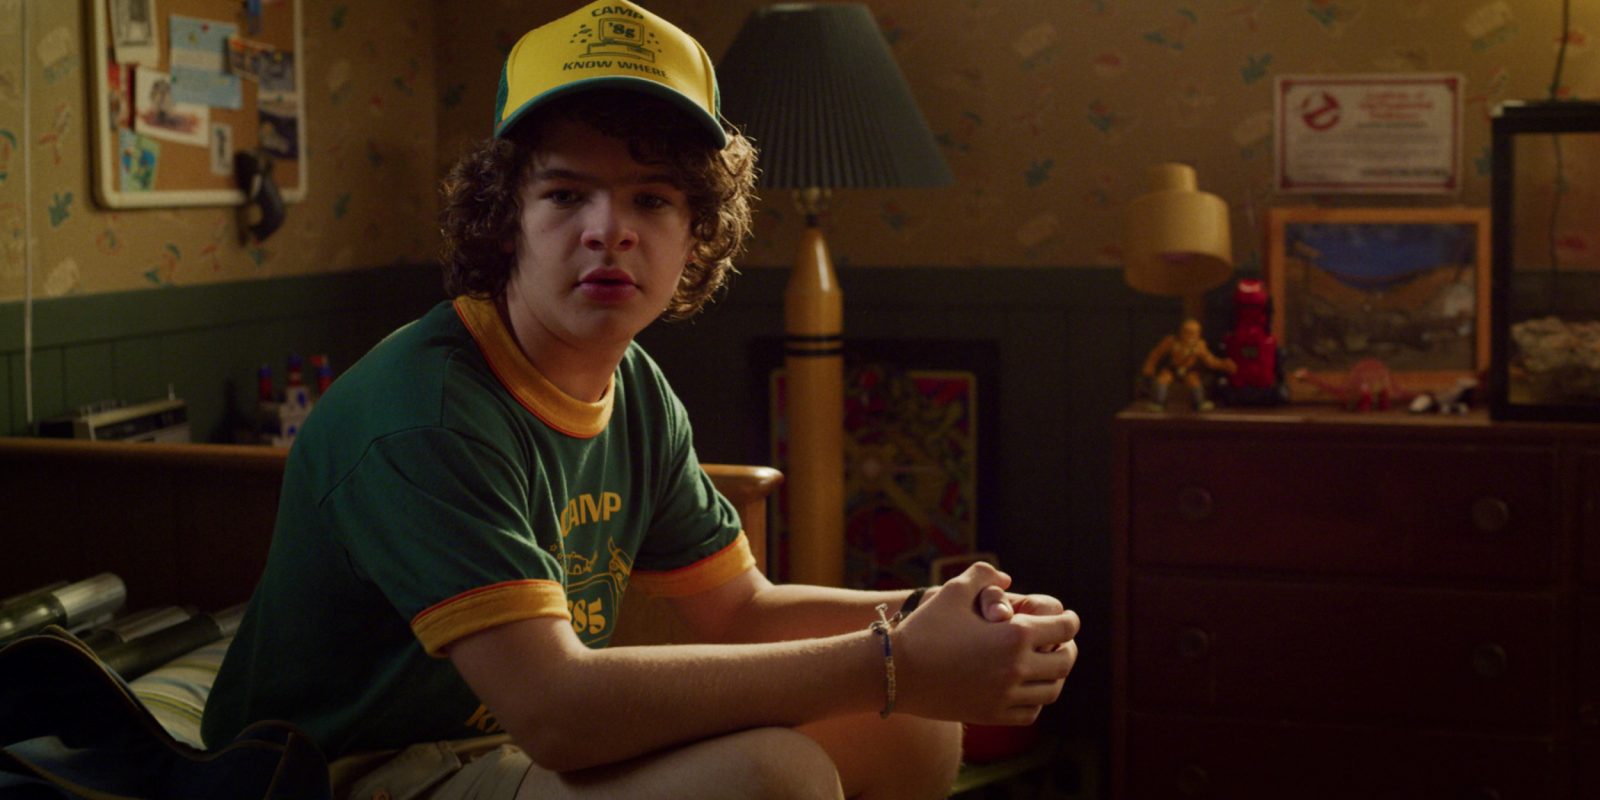 Which “Stranger Things 3” Character Are You? Dustin Stranger Things Season 3